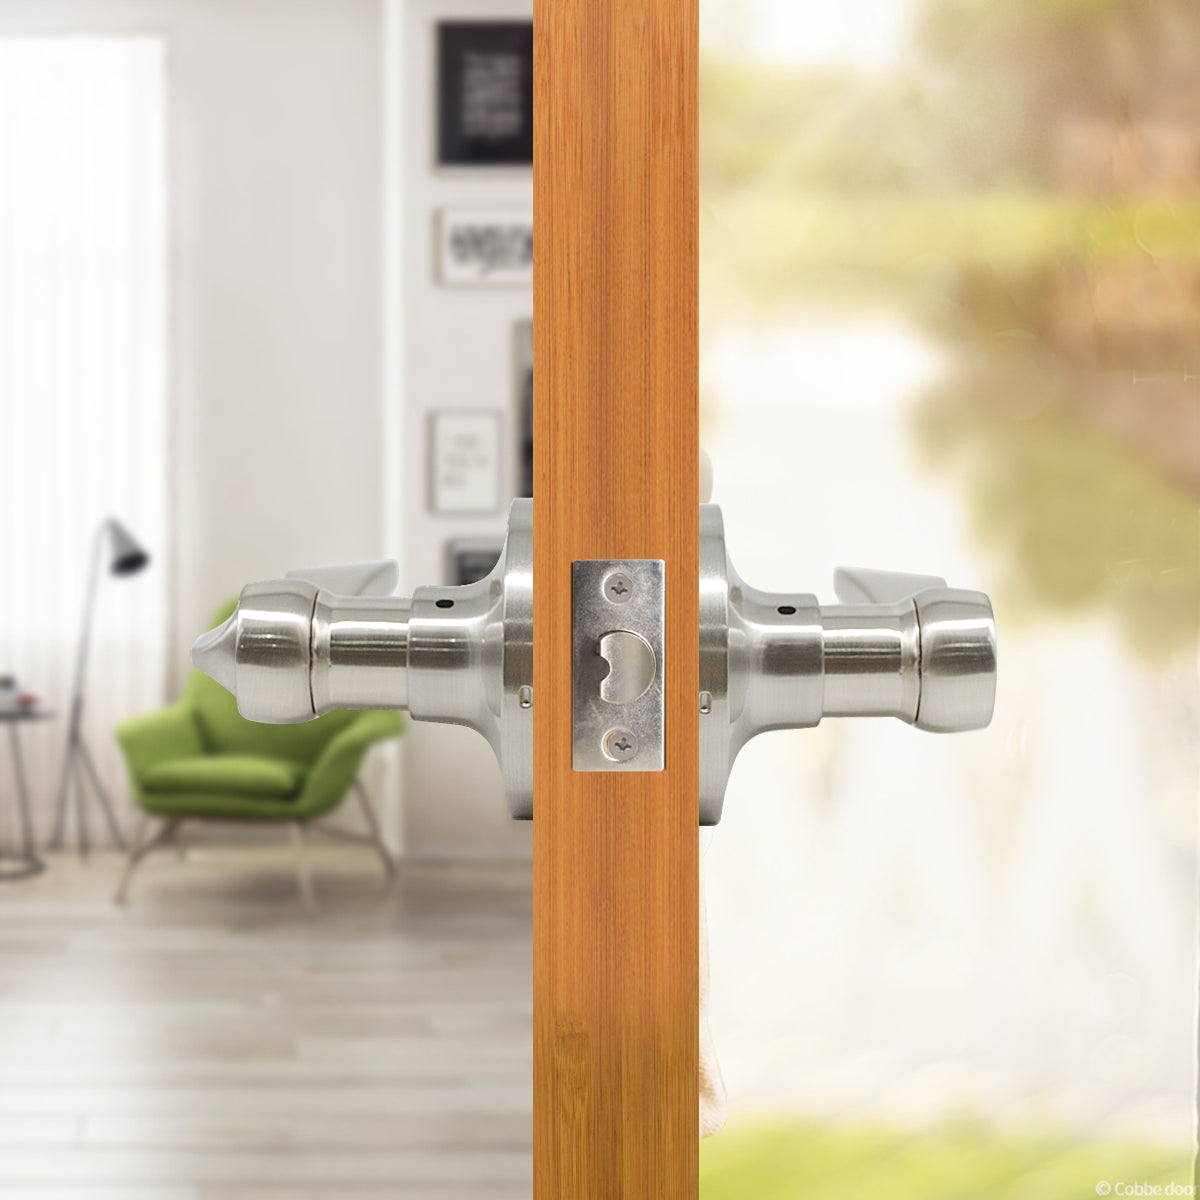 Privacy Door Lever set Brushed Nickel Finish with Wave Handle Style DL12061SNBK